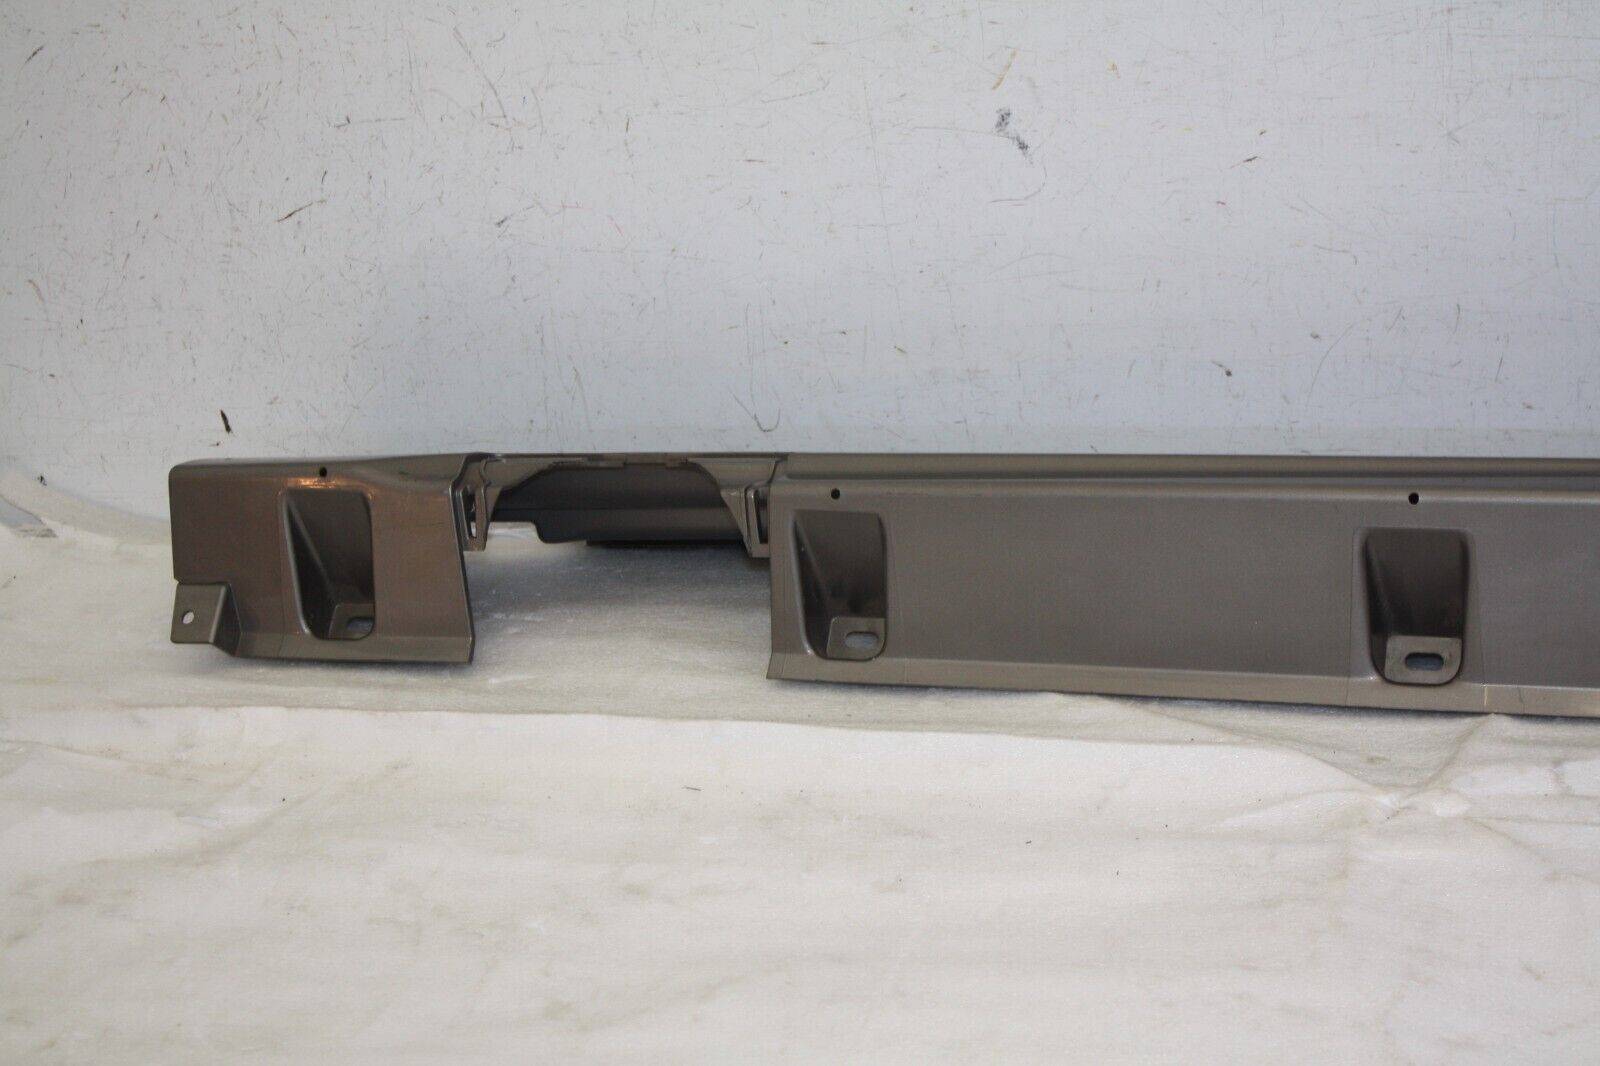 Range-Rover-Autobiography-Left-Side-Skirt-2009-TO-2012-BH4M-200B09-A-Genuine-176217123655-9